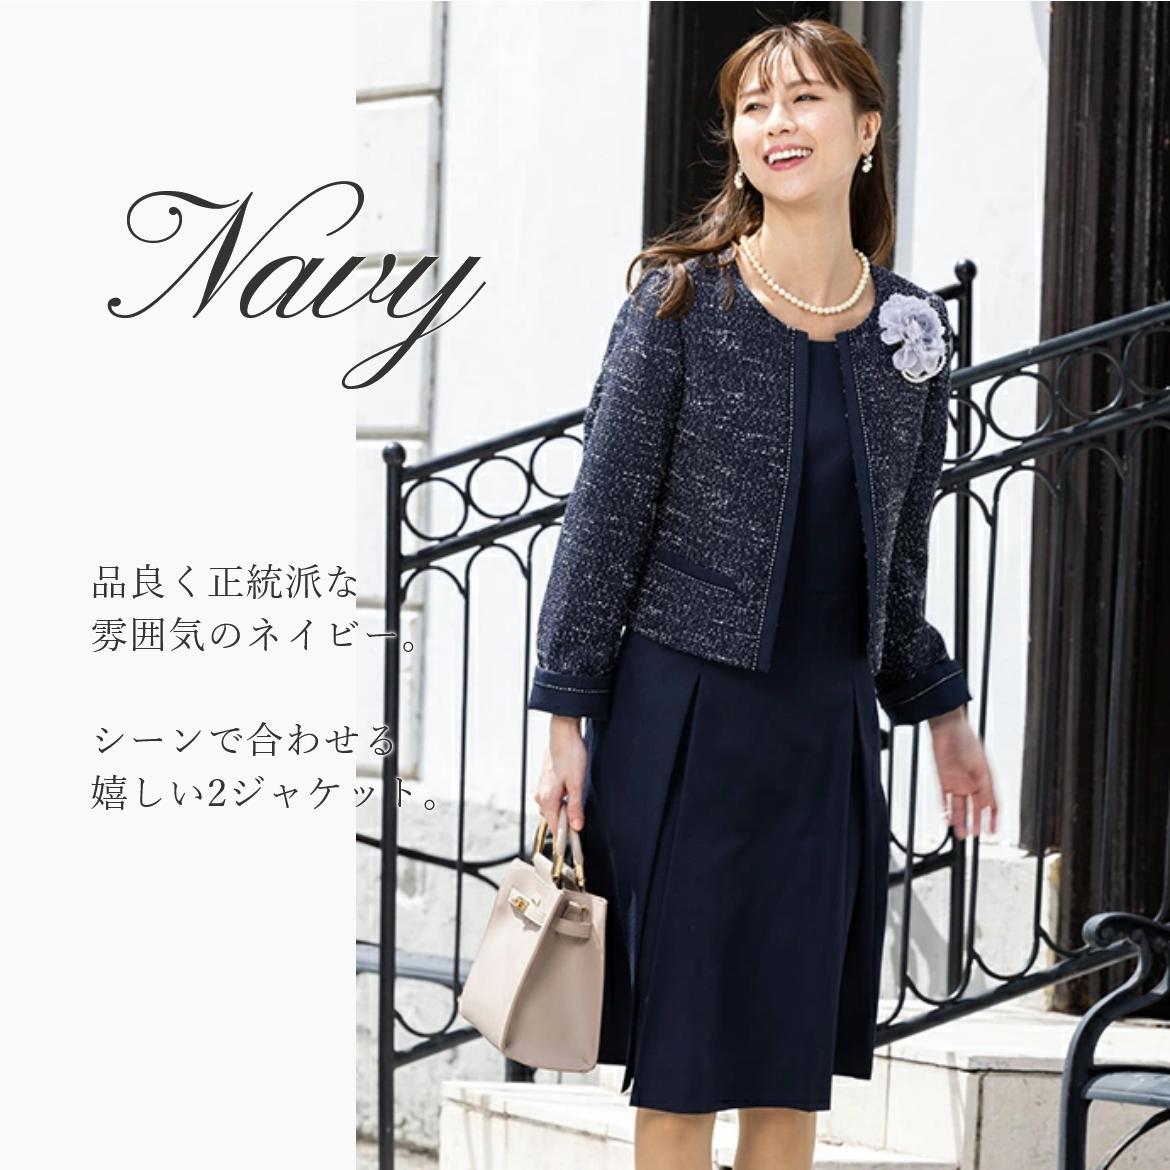  suit lady's formal suit One-piece suit clothes equipment go in . type ceremony suit go in . type .. type graduation ceremony mama .30 fee 40 fee 50 fee 60 fee face join awarding type 